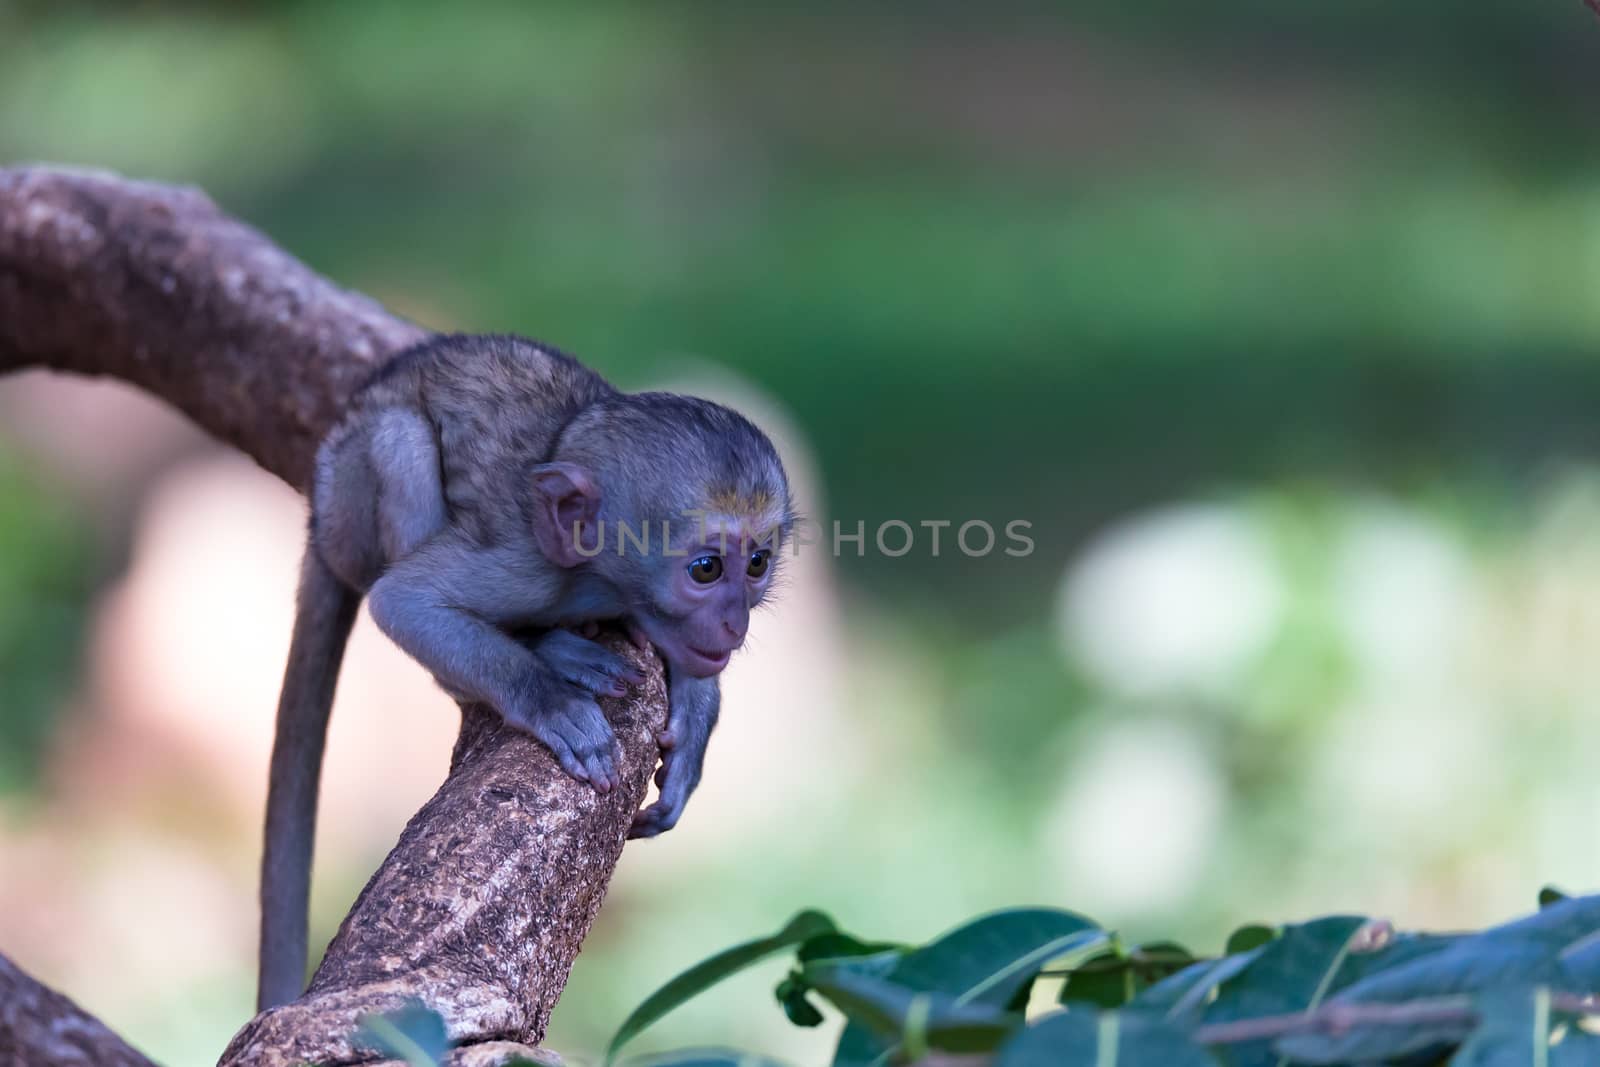 The monkey climbs around on a branch